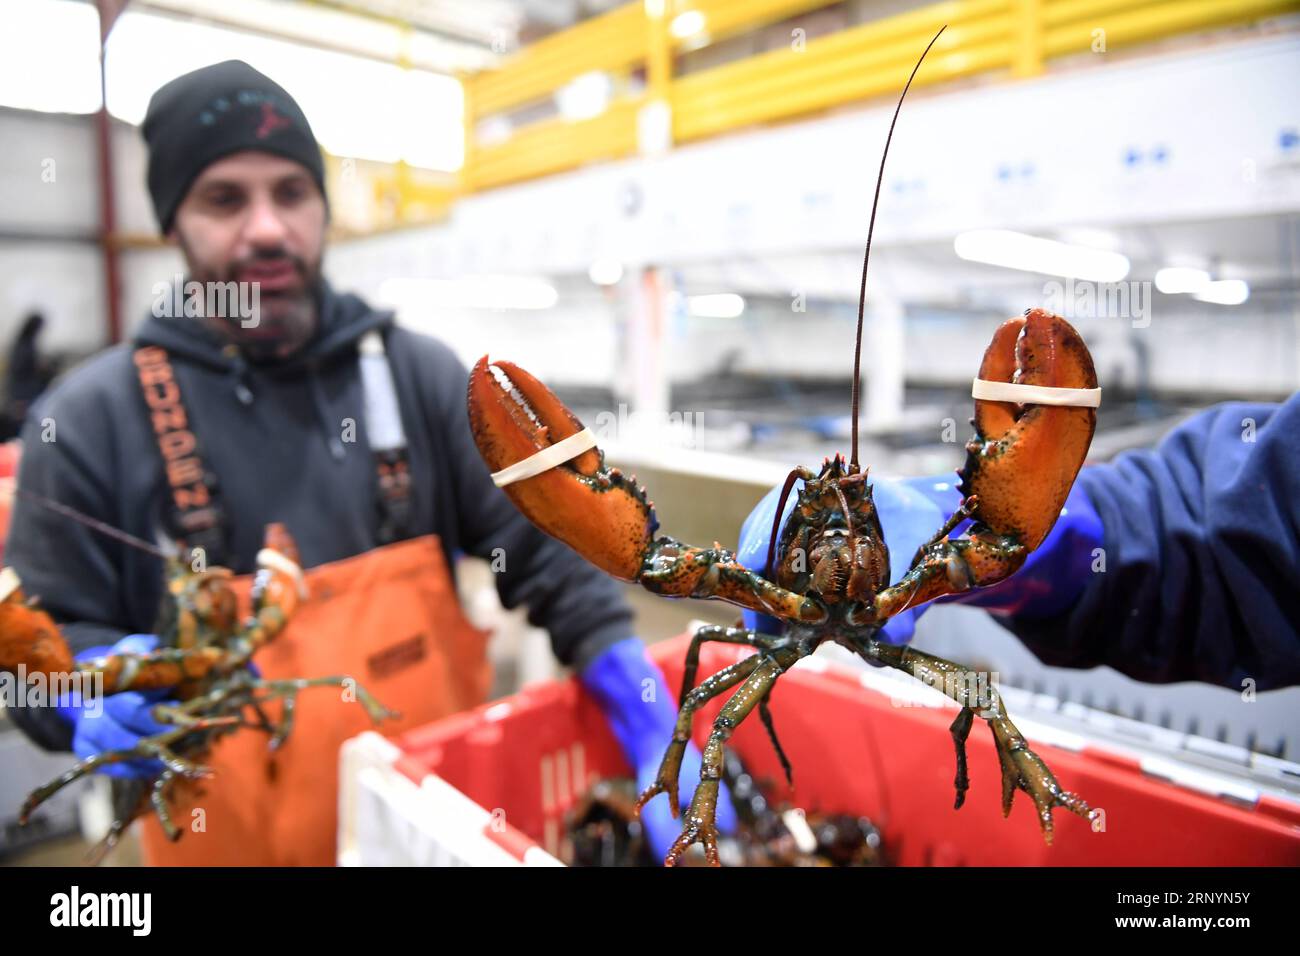 (180327) -- BEIJING, March 27, 2018 -- Phil Miles (L) and Dave Bedell of Maine Coast company pack lobsters in Portland, Maine, the United States, March 29, 2017. In 2016, China bought 40.9 million dollars worth of lobsters from Maine, where most of America s lobsters are caught. A huge trade deficit with China is reportedly behind the U.S. administration s plan to slap tariffs on up to 60 billion U.S. dollars of Chinese imports and restrict Chinese investment. But data sometimes lies, and could shield the bigger picture. ) (djj) Xinhua Headlines: Truth behind China-U.S. trade imbalances YinxBo Stock Photo